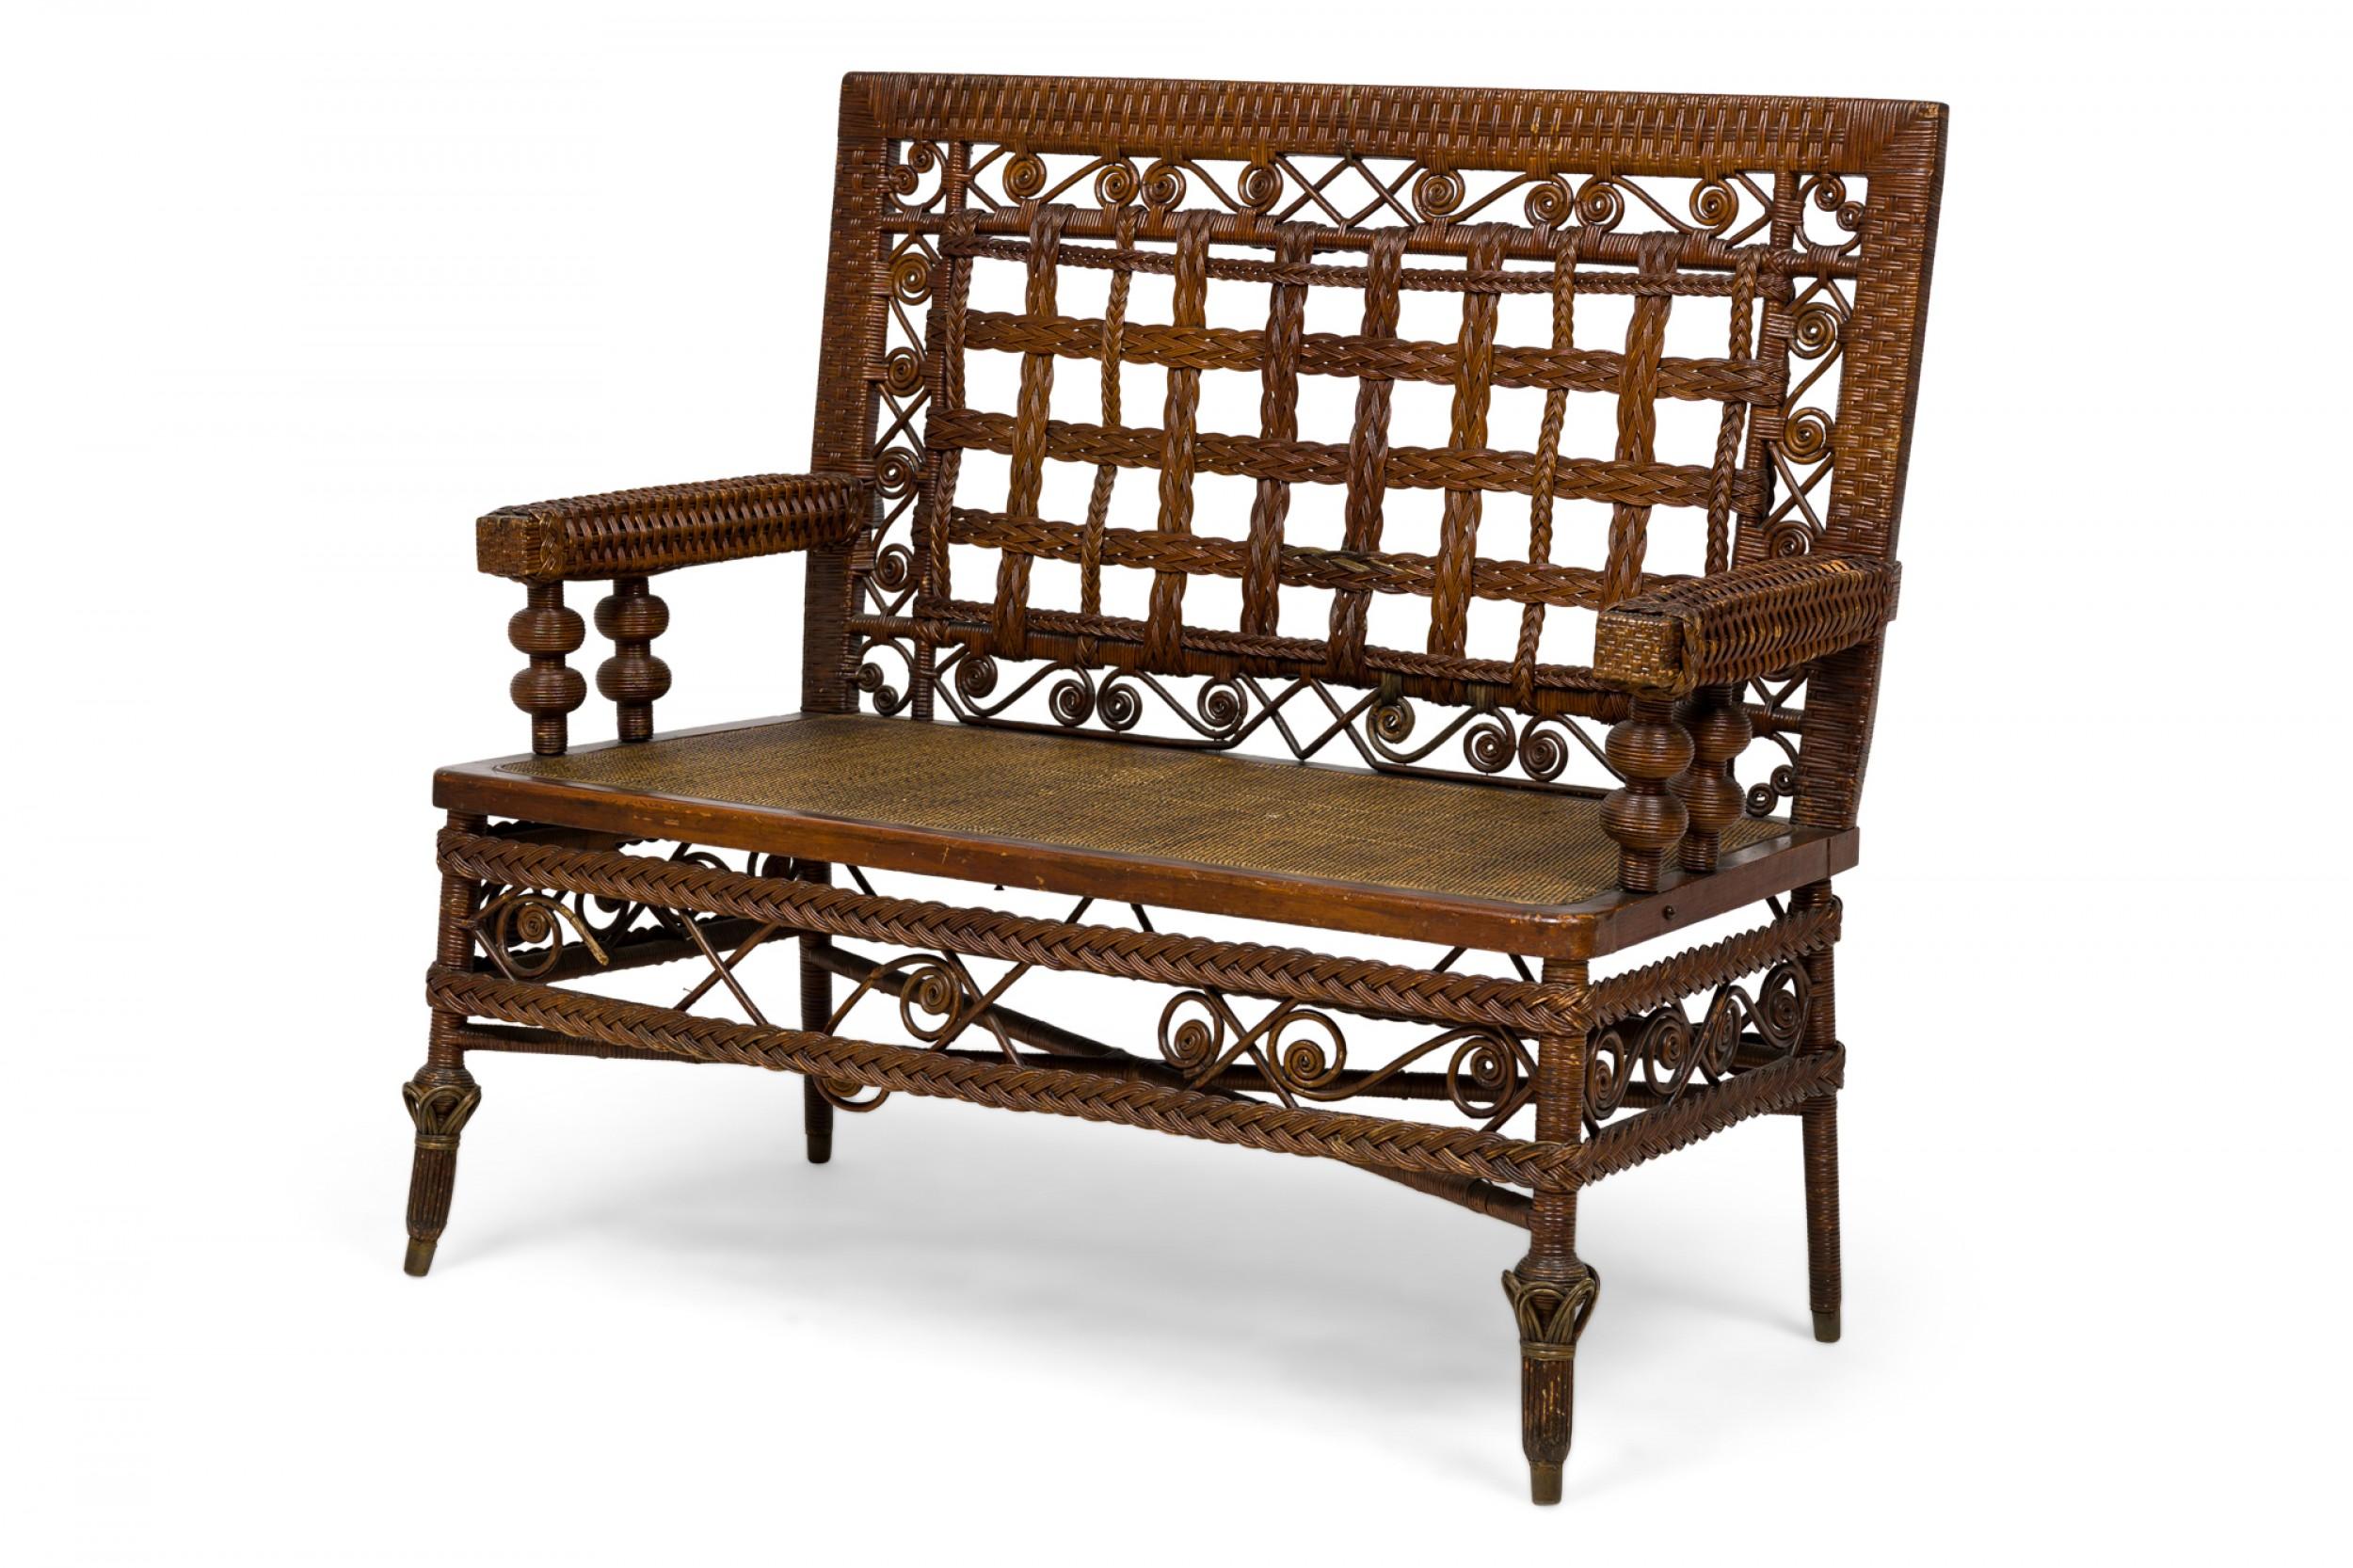 3 Piece American Victorian Braided Wicker Scroll and Lattice Design Seating Set  In Good Condition For Sale In New York, NY